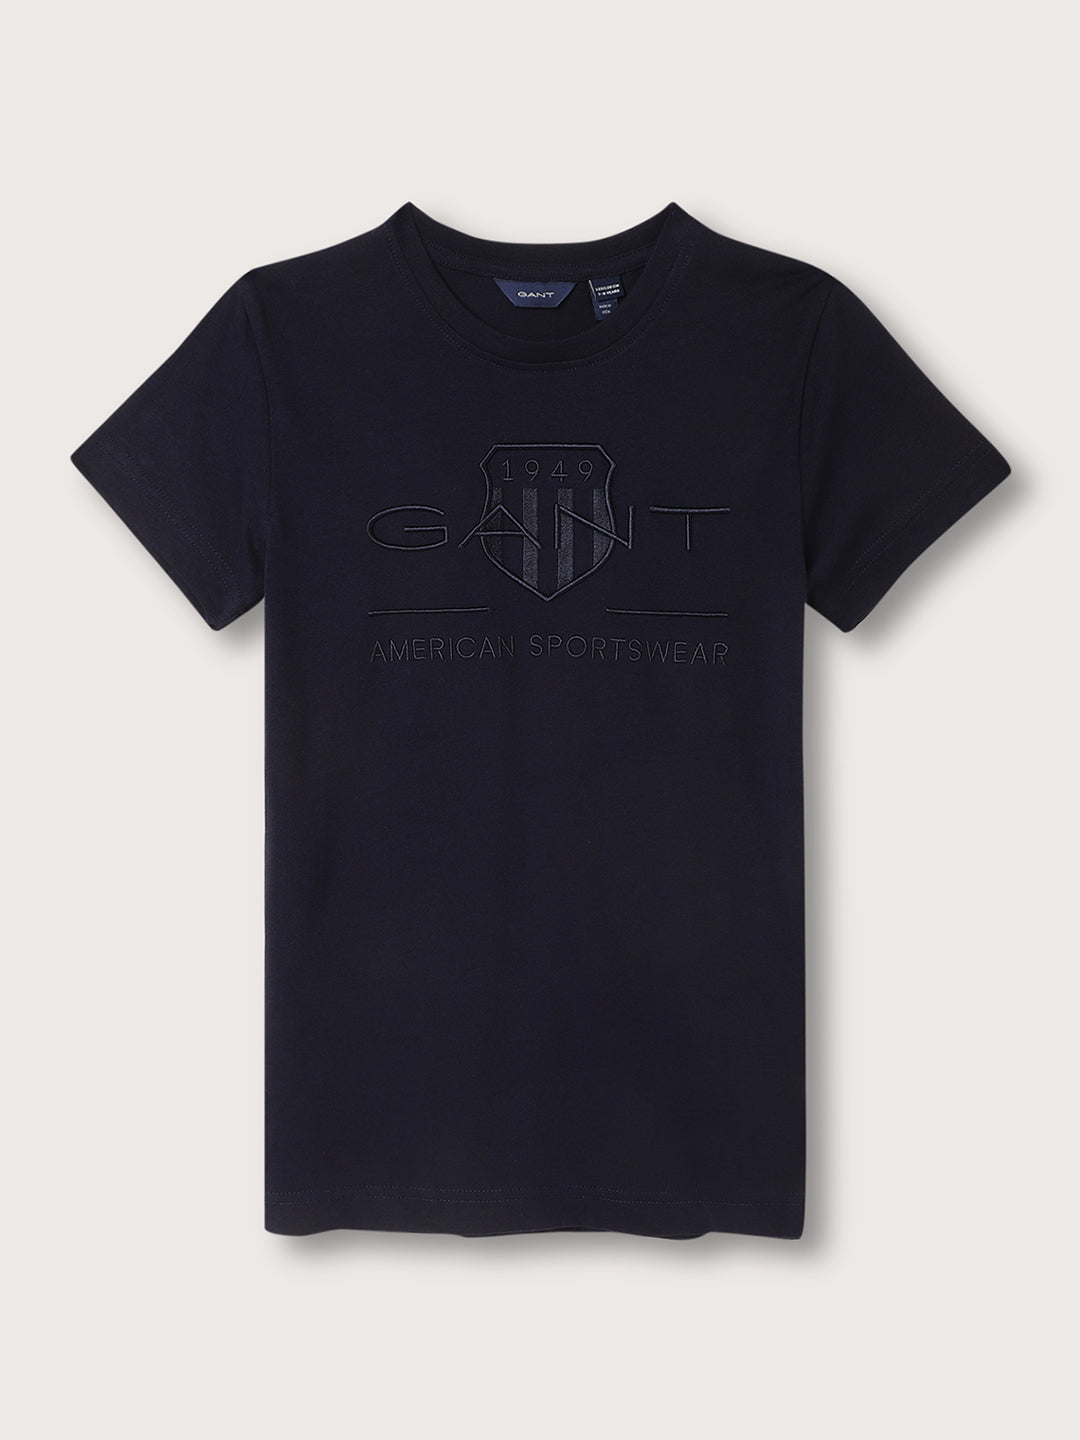 Gant Boys Typography Embroidered Cotton T-shirt